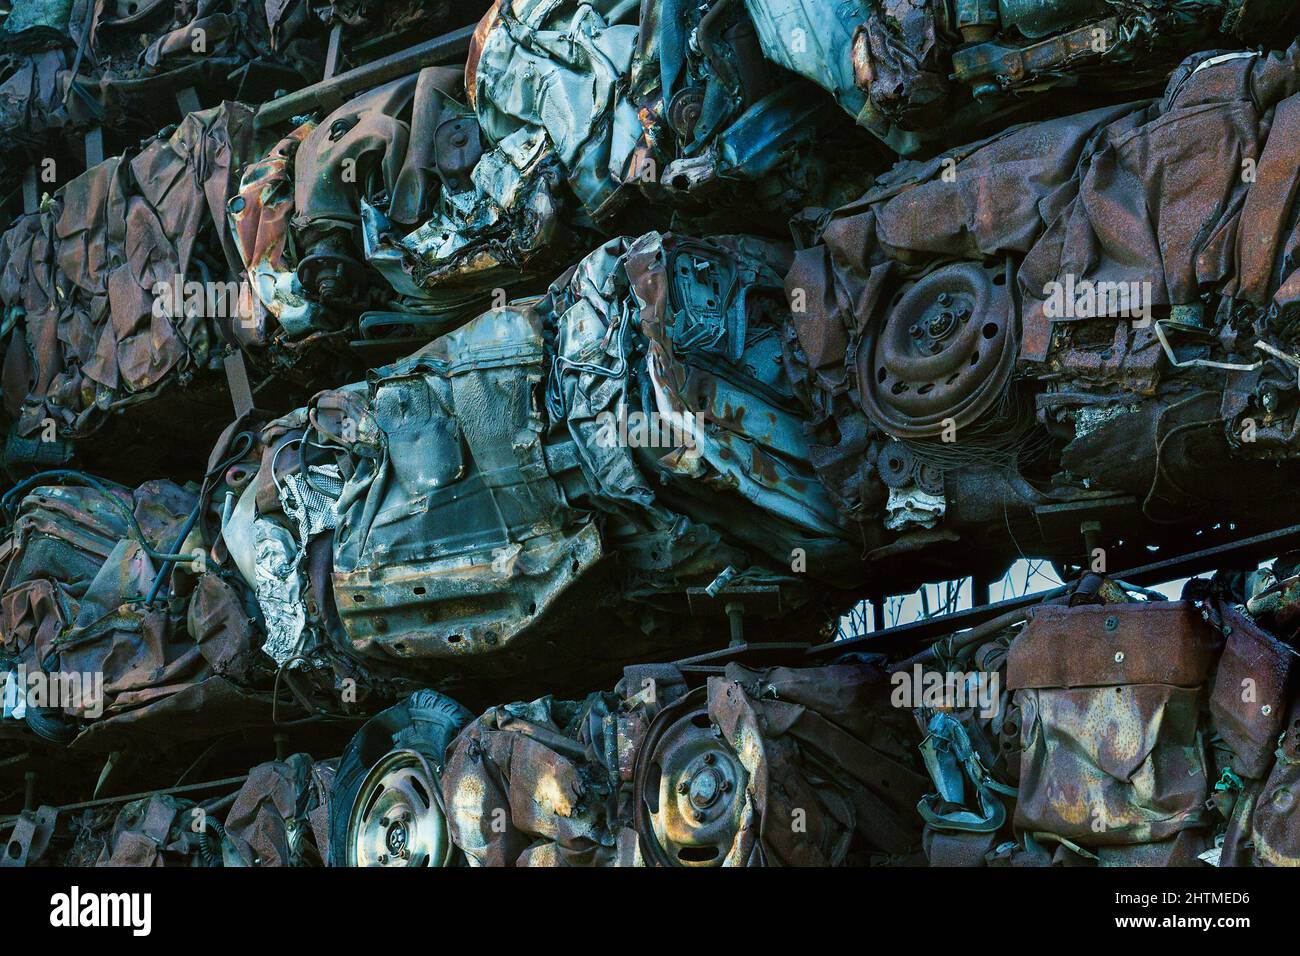 A wall of crushed, compacted cars. Perhaps a useful conceptual representation of environmental pollution issues. Stock Photo